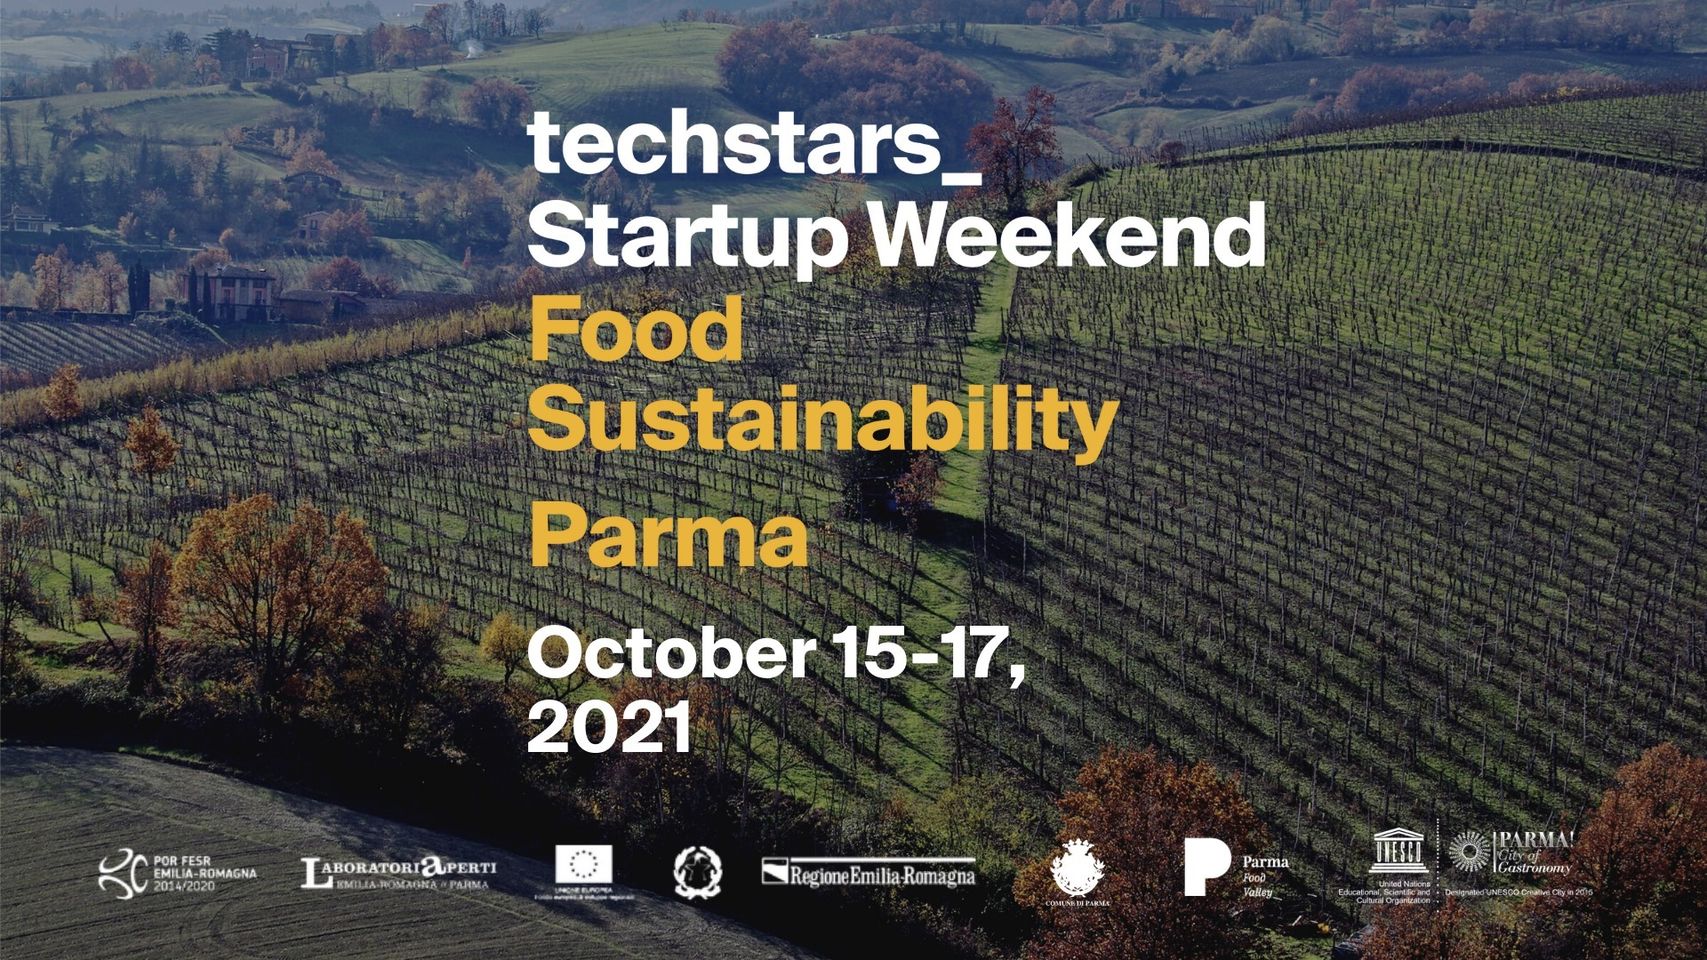 Startup Weekend Food Sustainability Parma